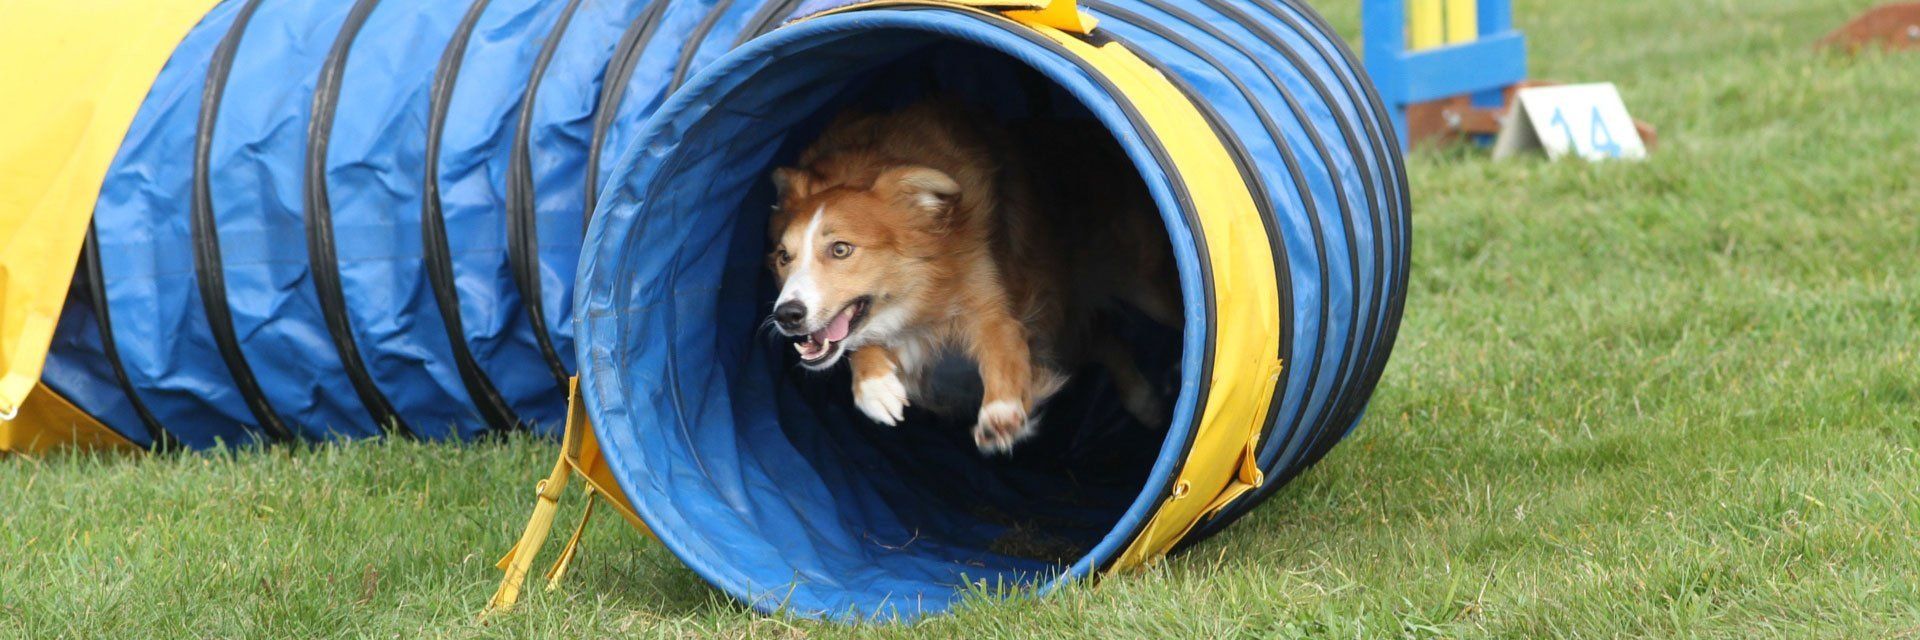 dog inside the tunnel